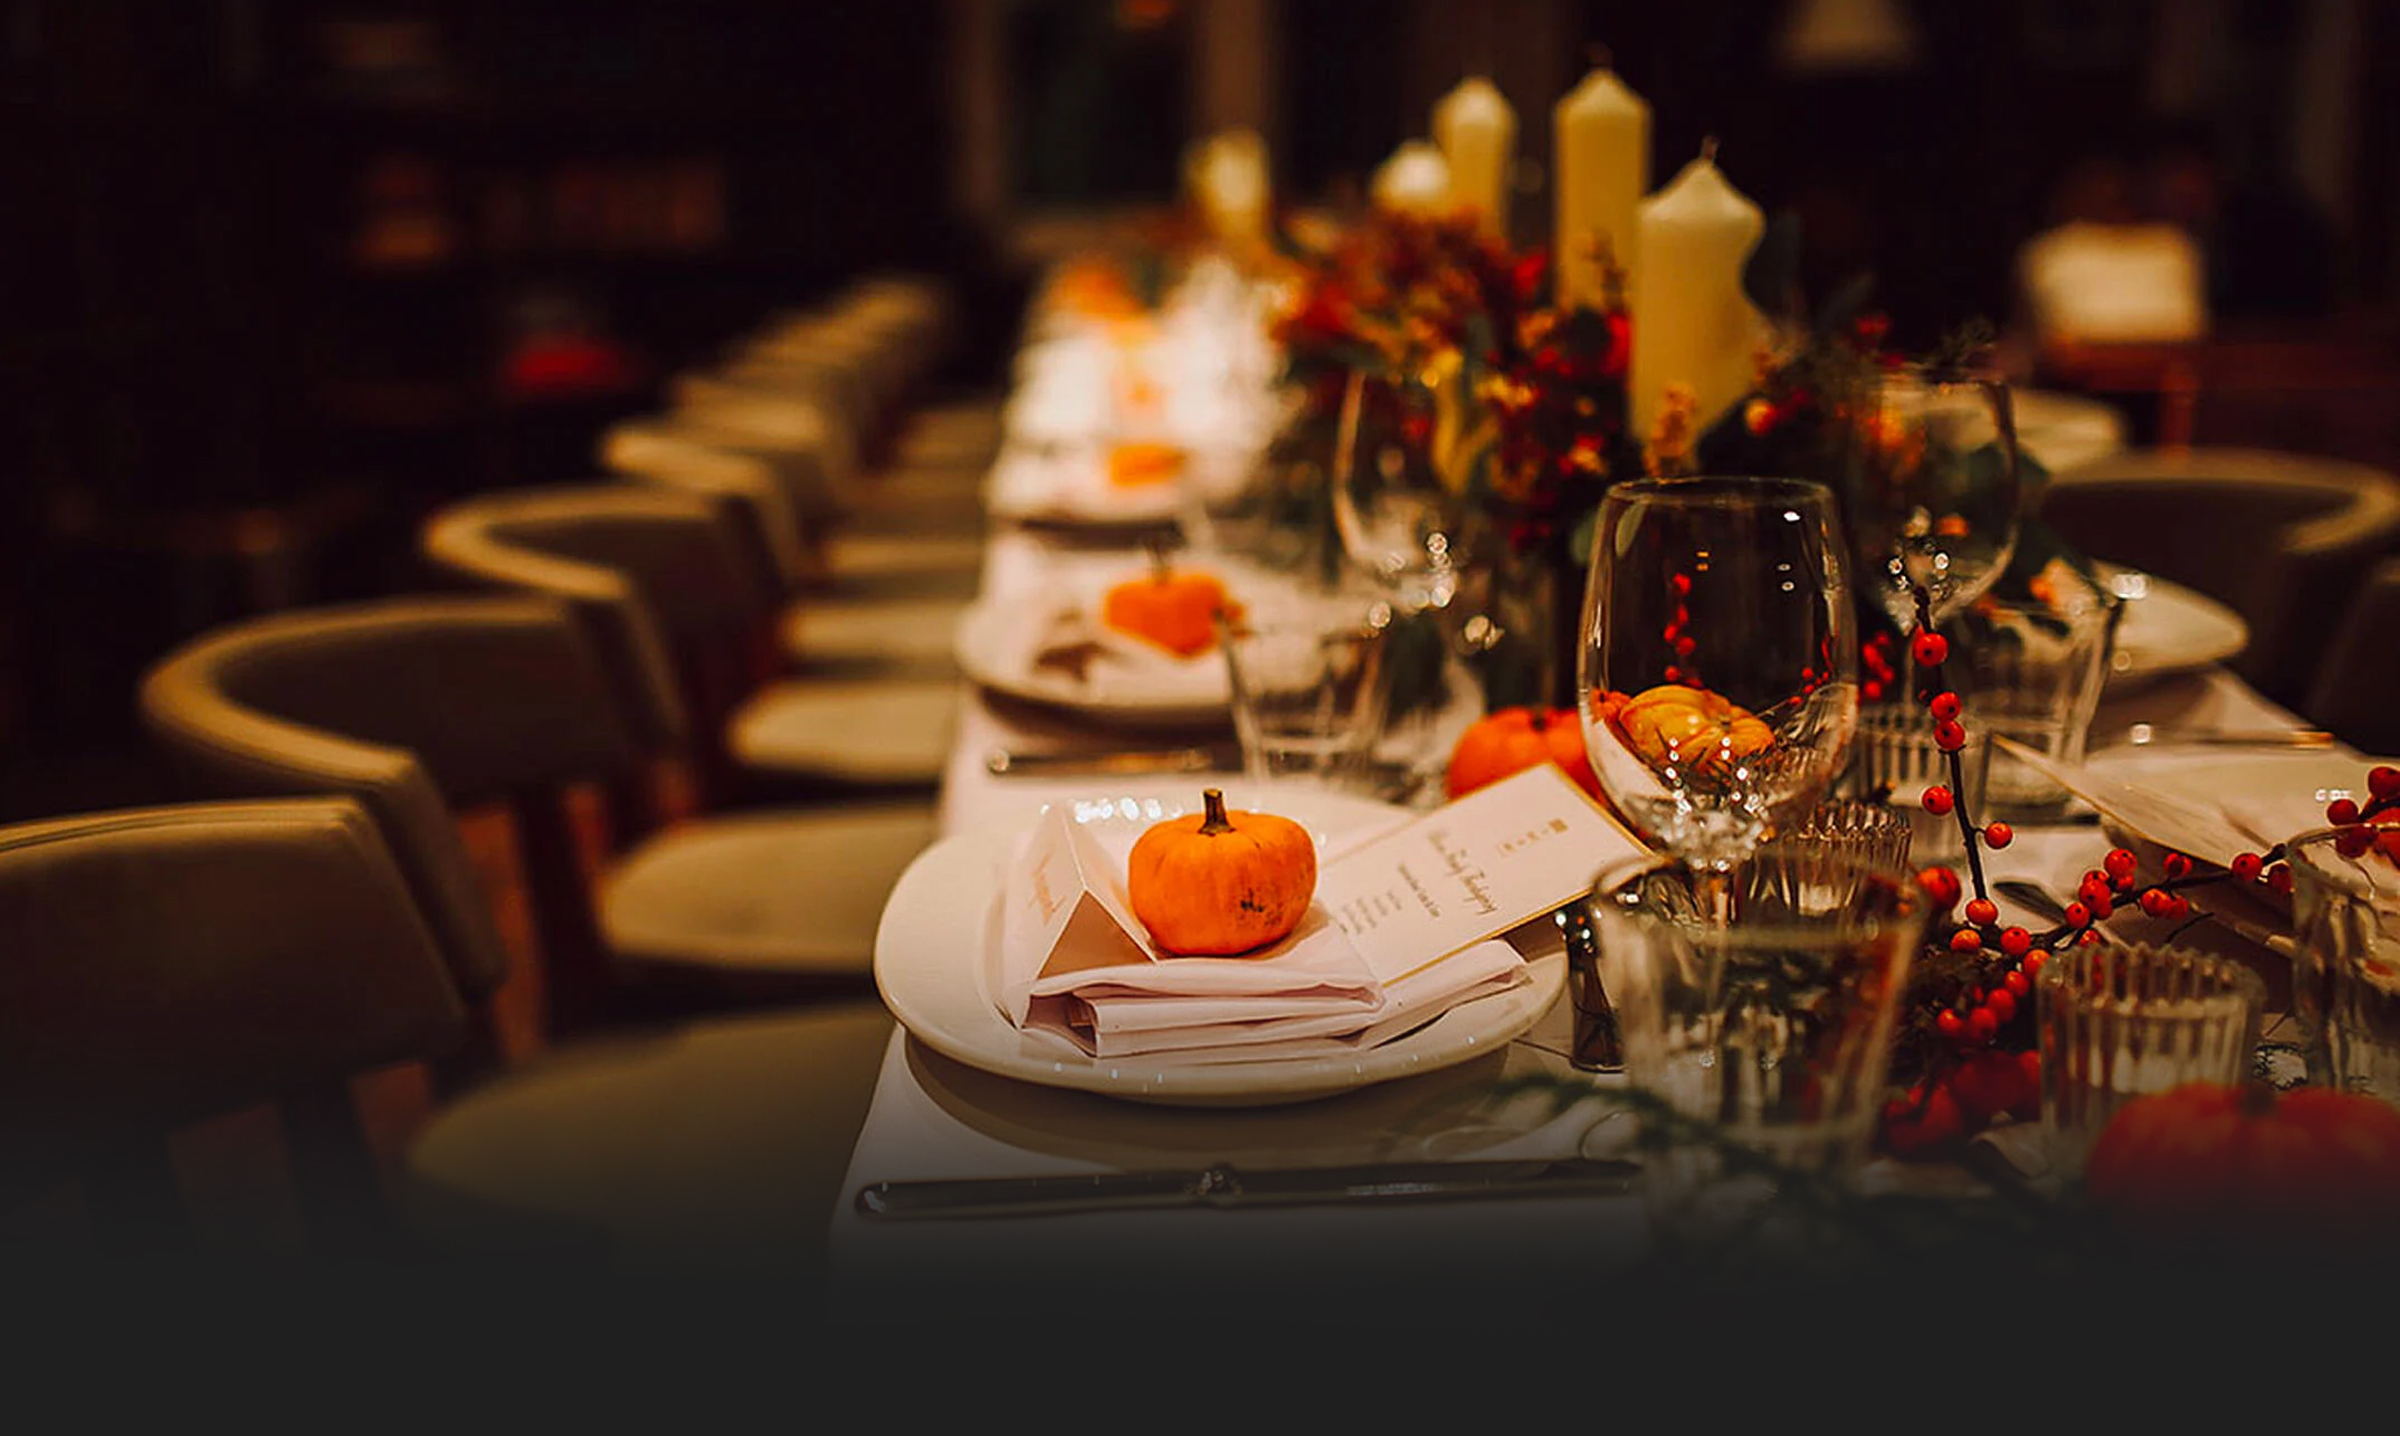 Fall styled table setting in restaurant